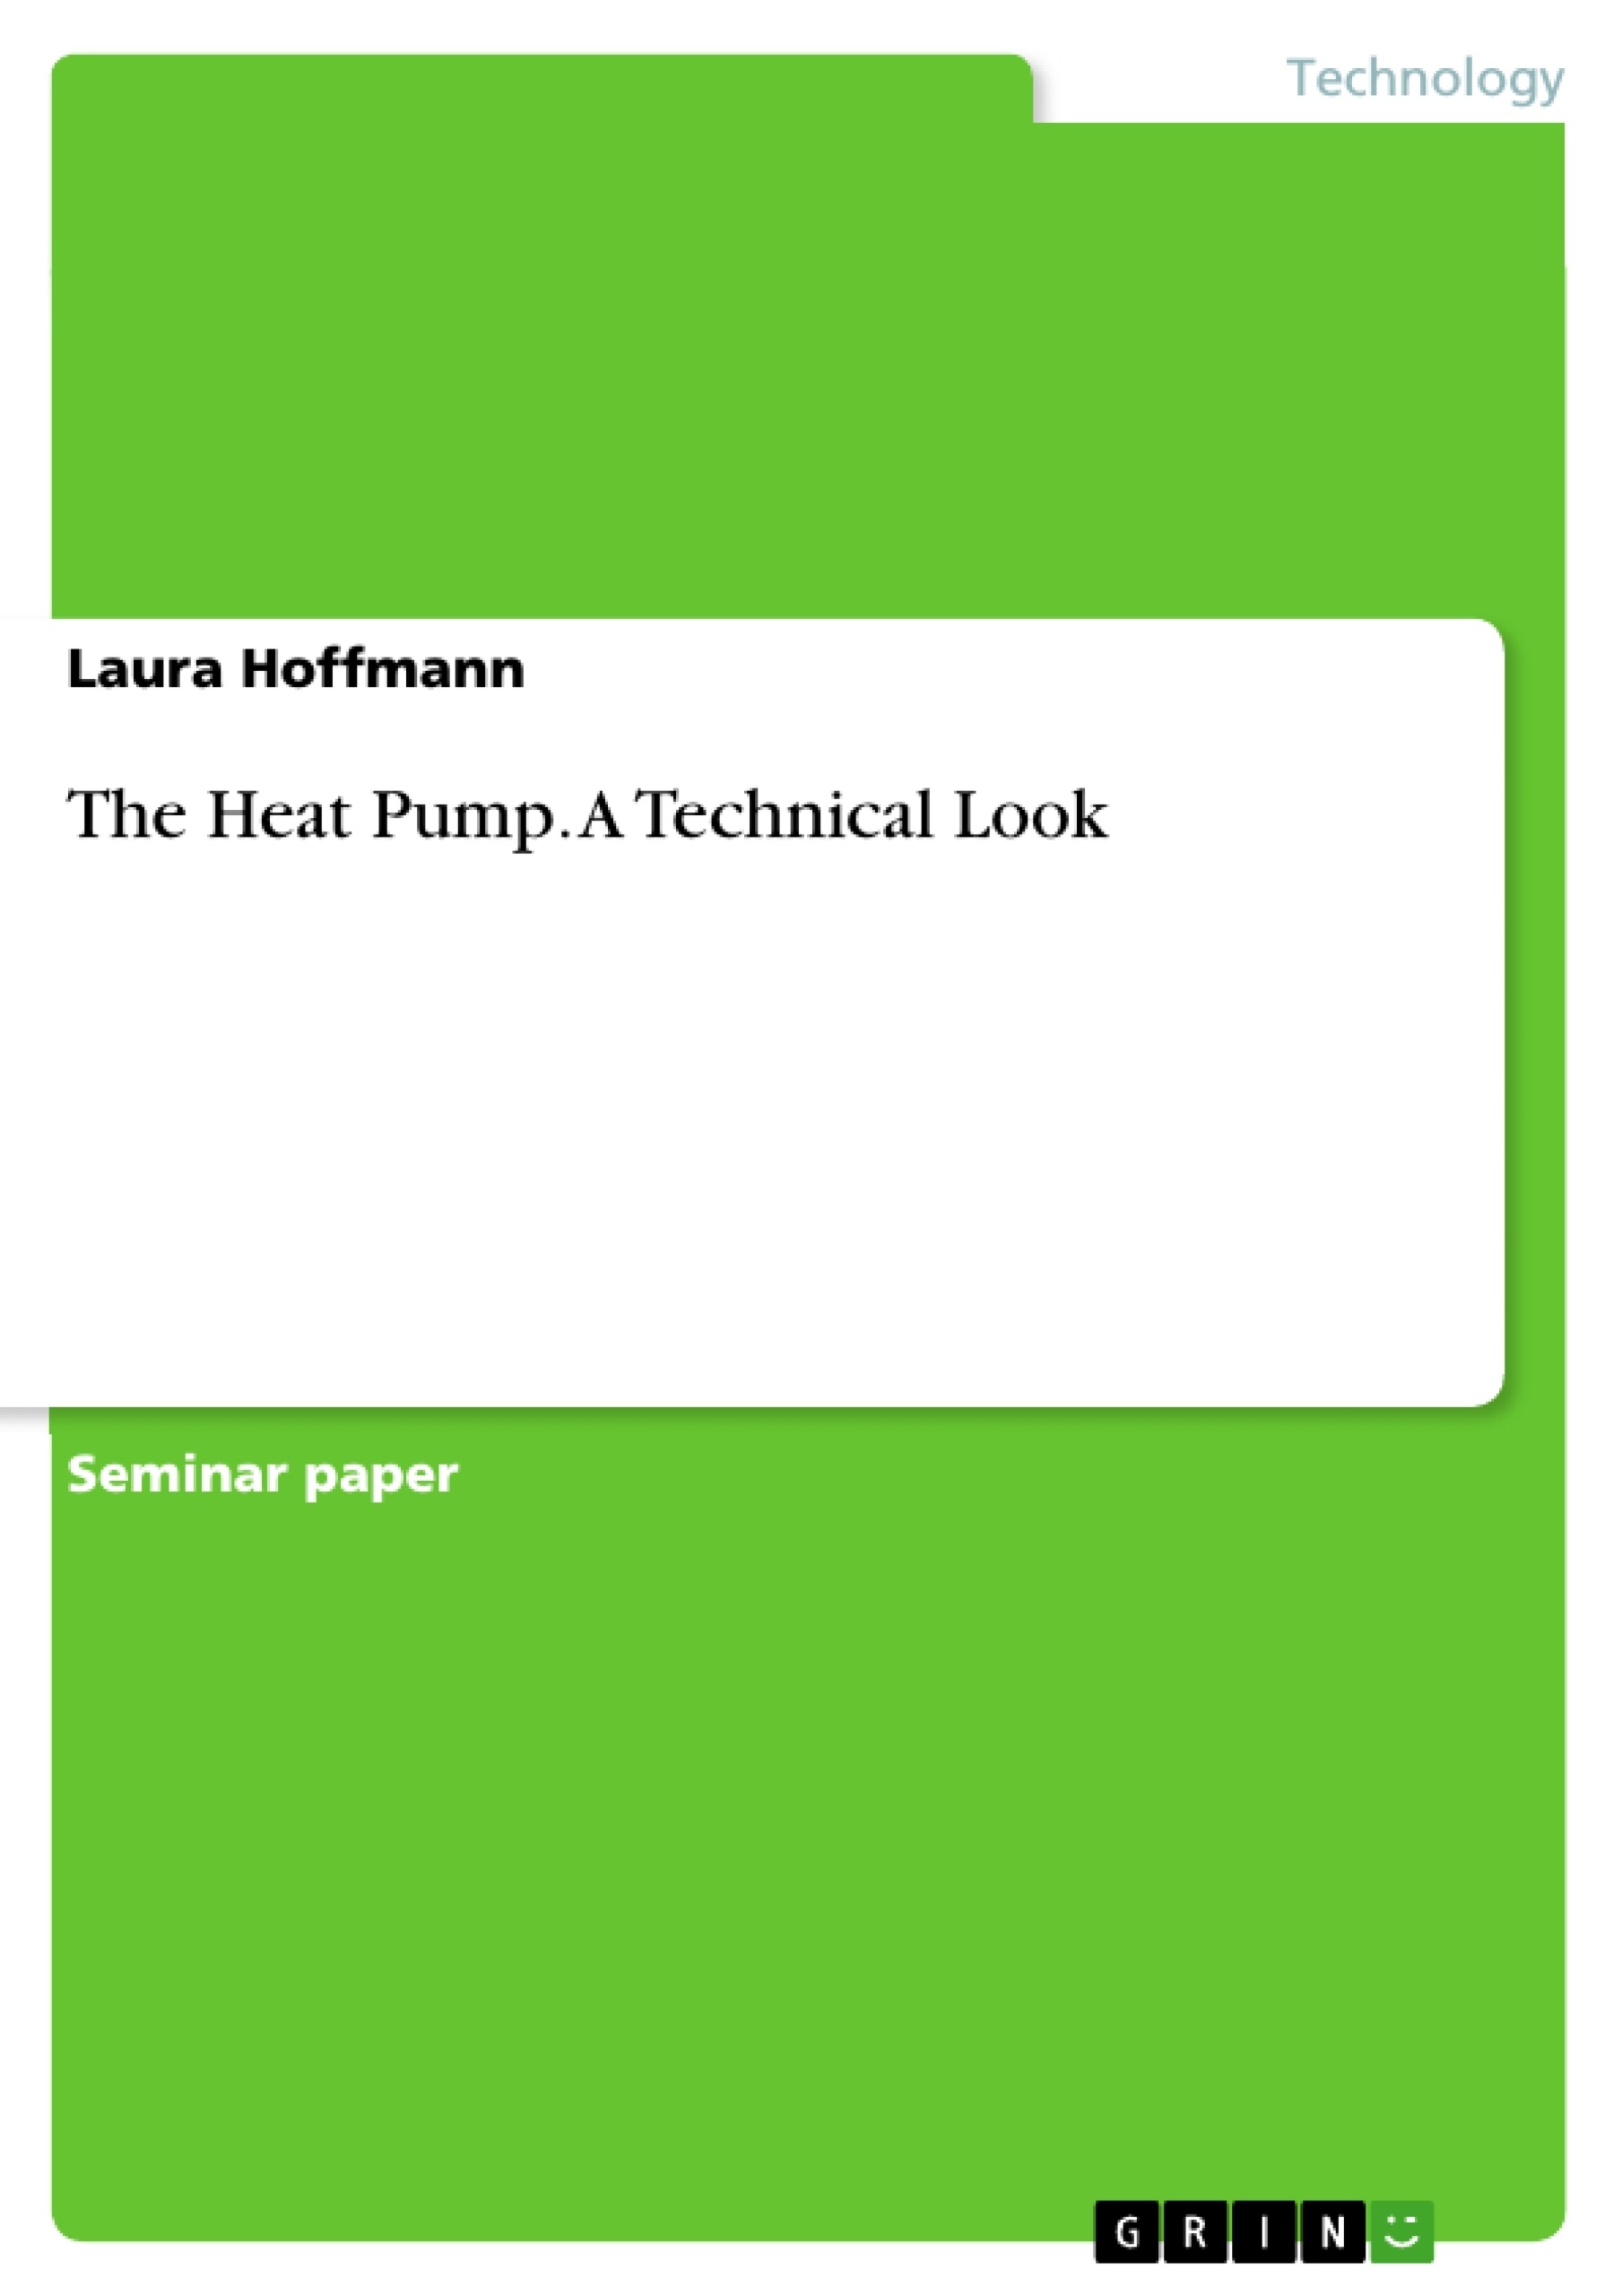 Title: The Heat Pump. A Technical Look